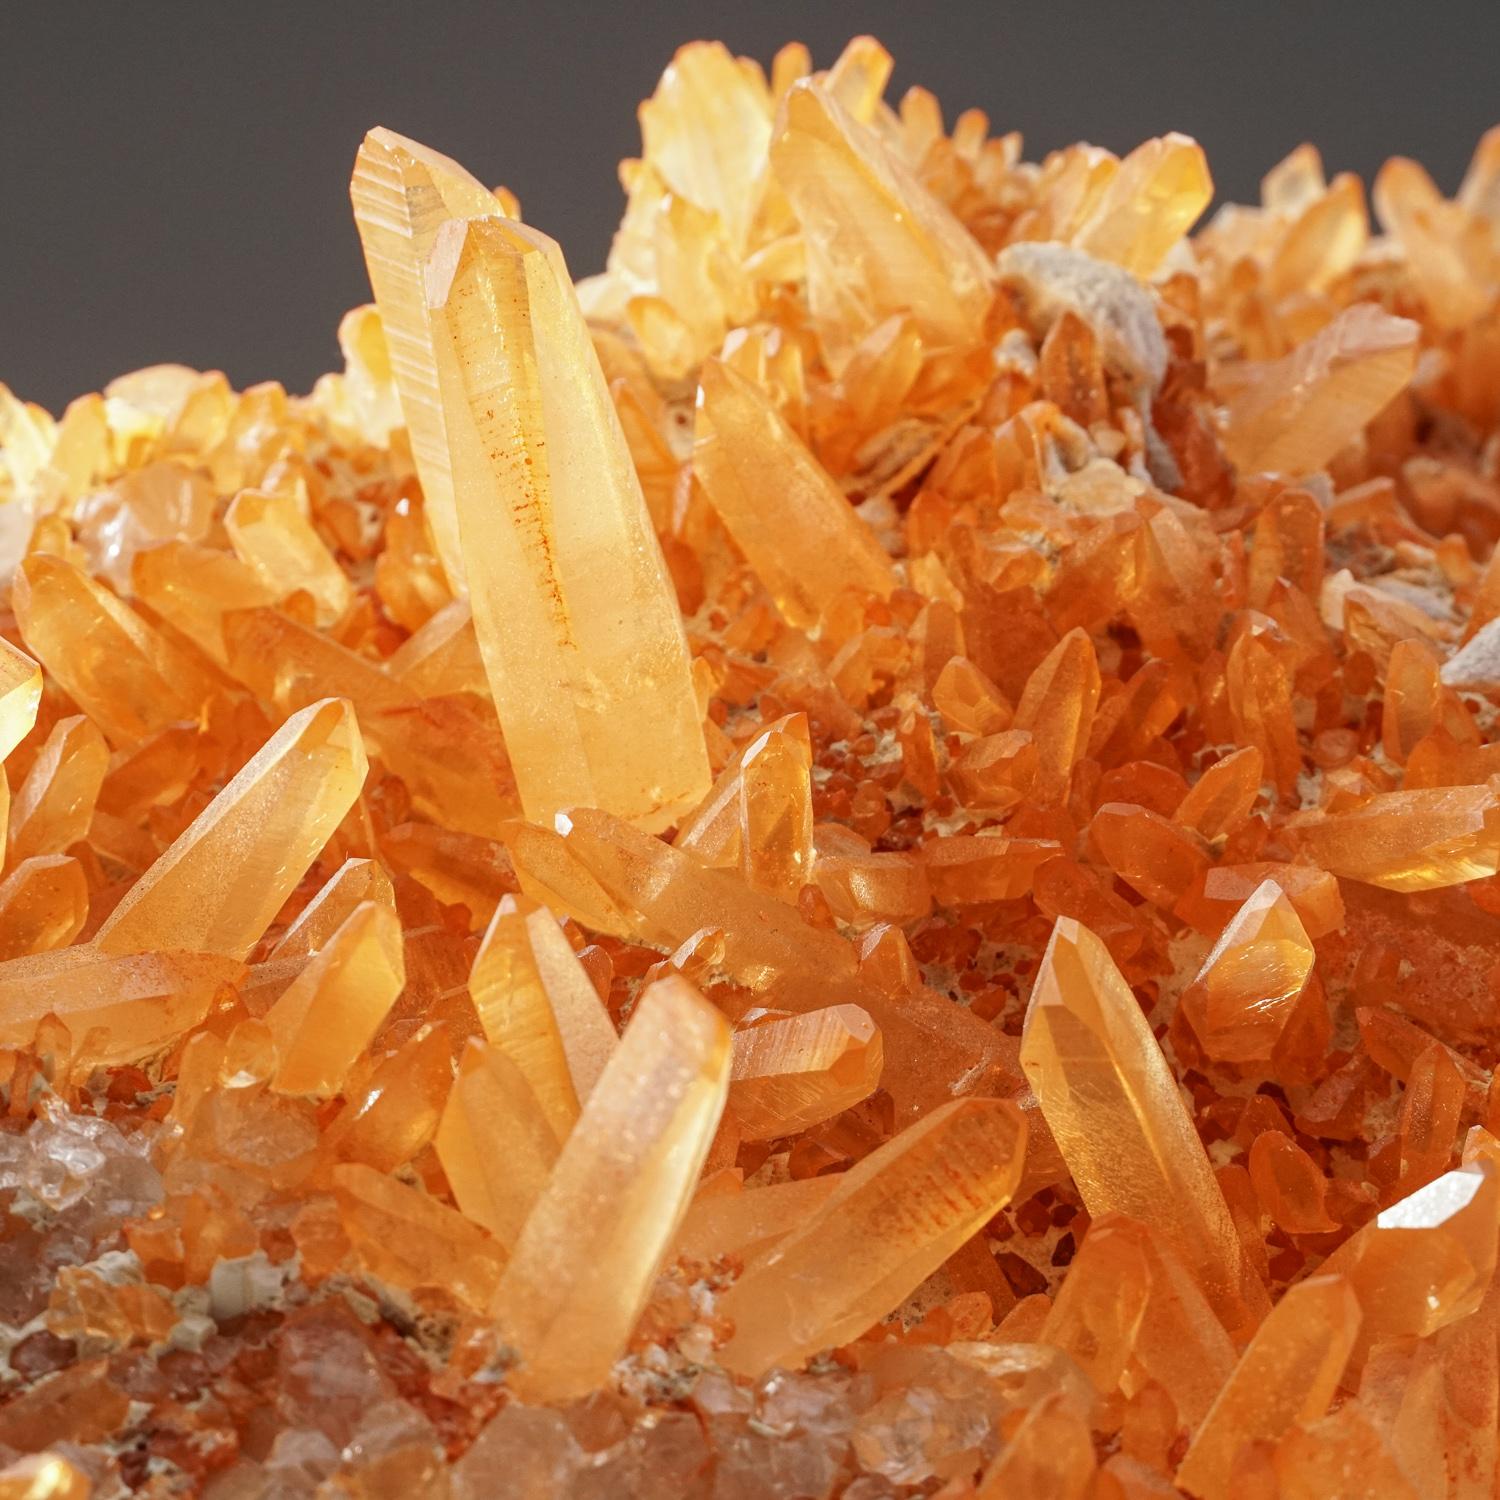 A large cluster of rare, orange tangerine quartz crystals, from the northern territory of Minas Gerais, Brazil. These rare quartz clusters are only found in this region of the world. A hematite oxidate within the quartz has created the orange color.